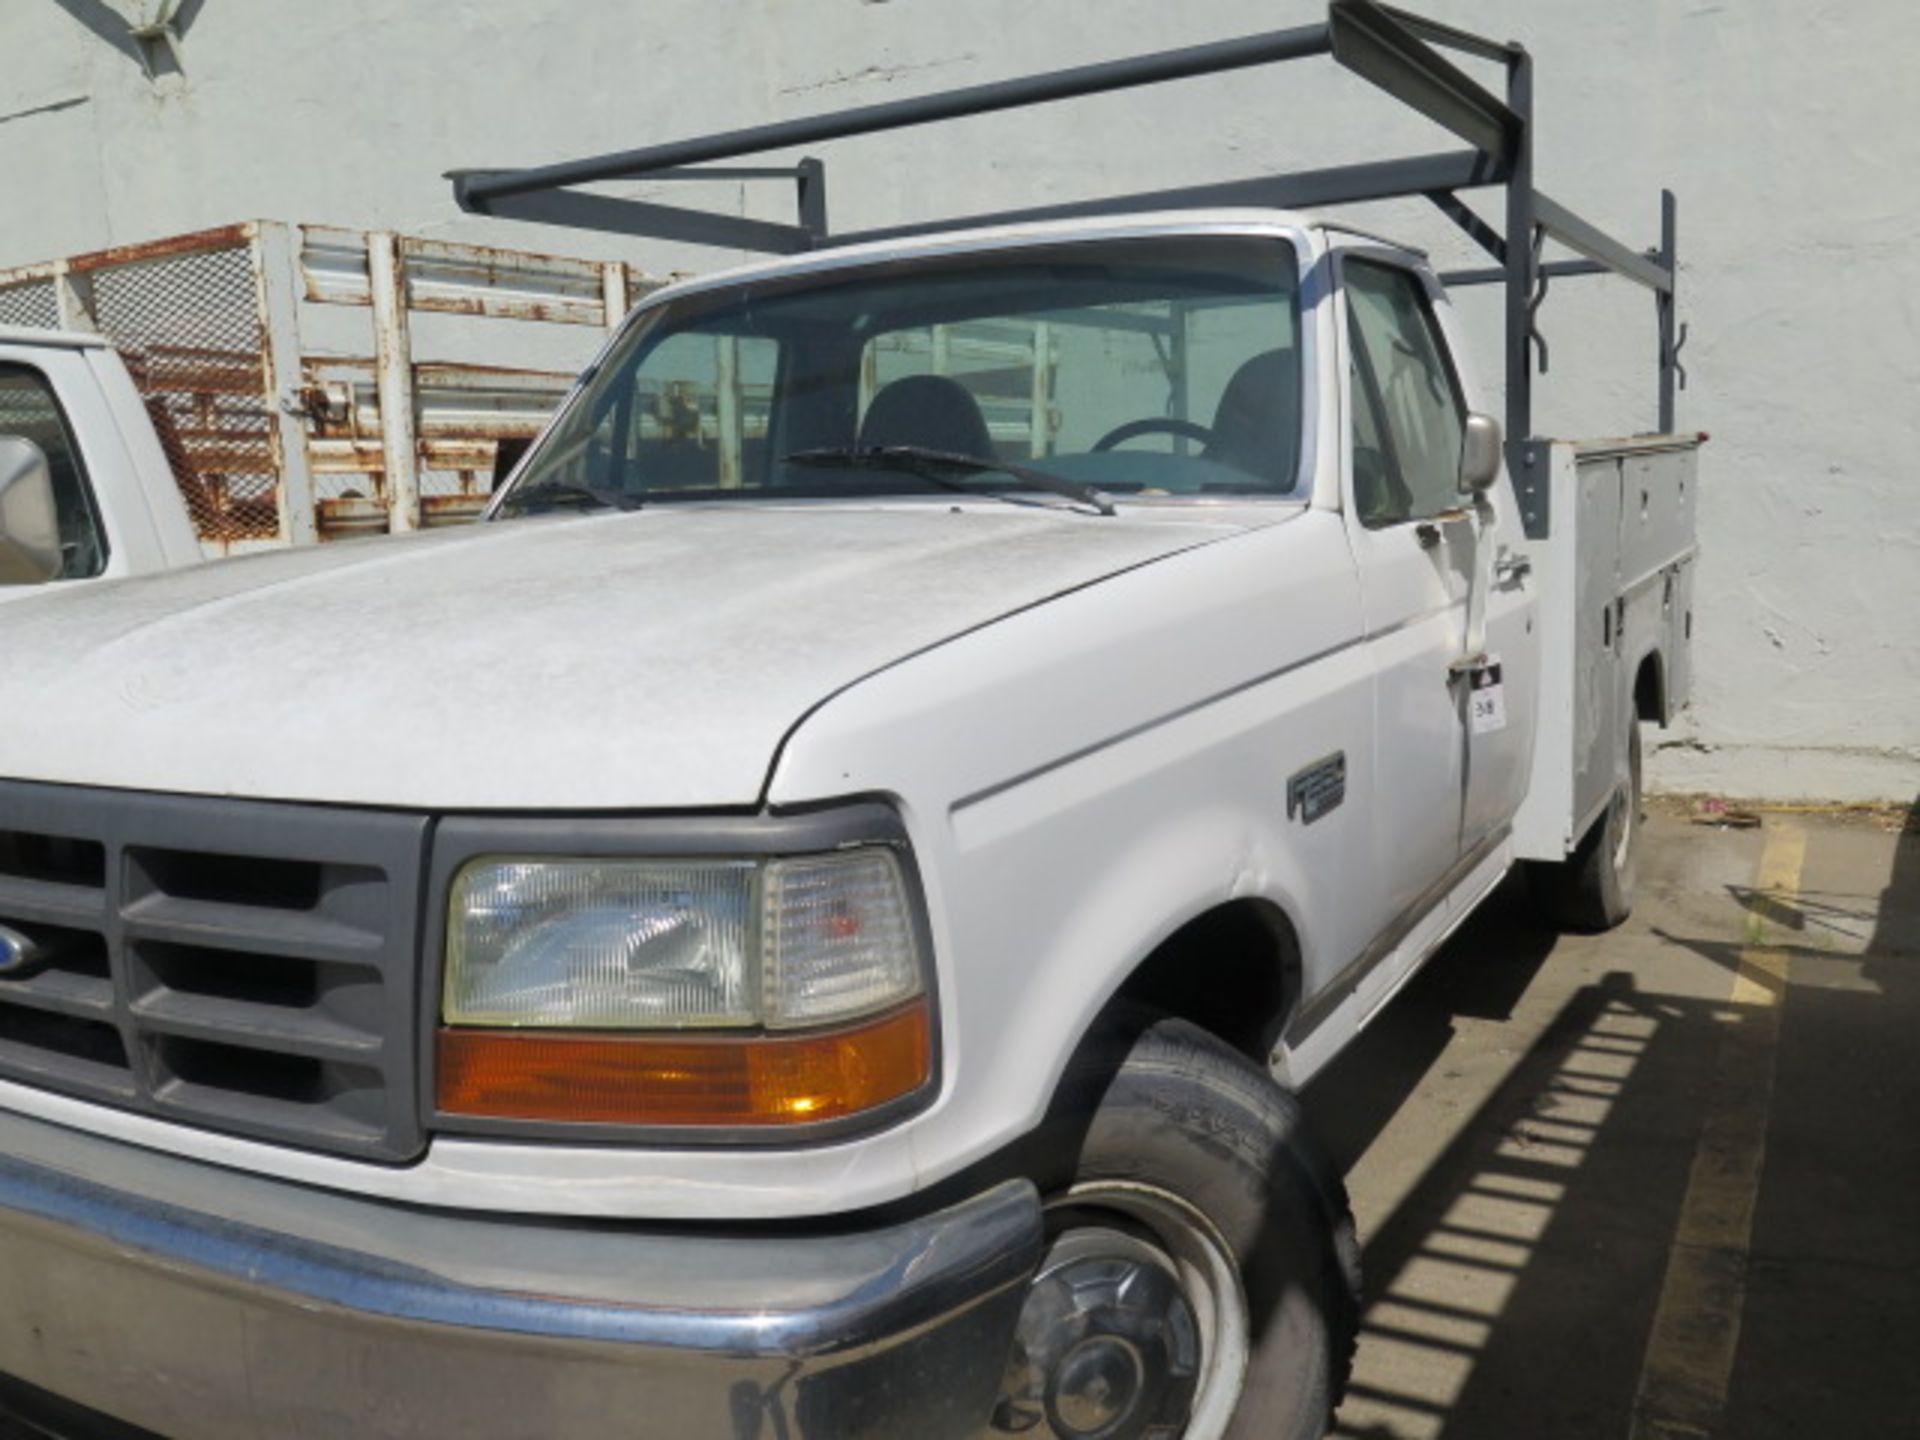 1995 Ford F-250XL Service Truck w/ Gas Engine, Automatic Trans, AC Vin# 1FTEF25N15NB11666,SOLD AS IS